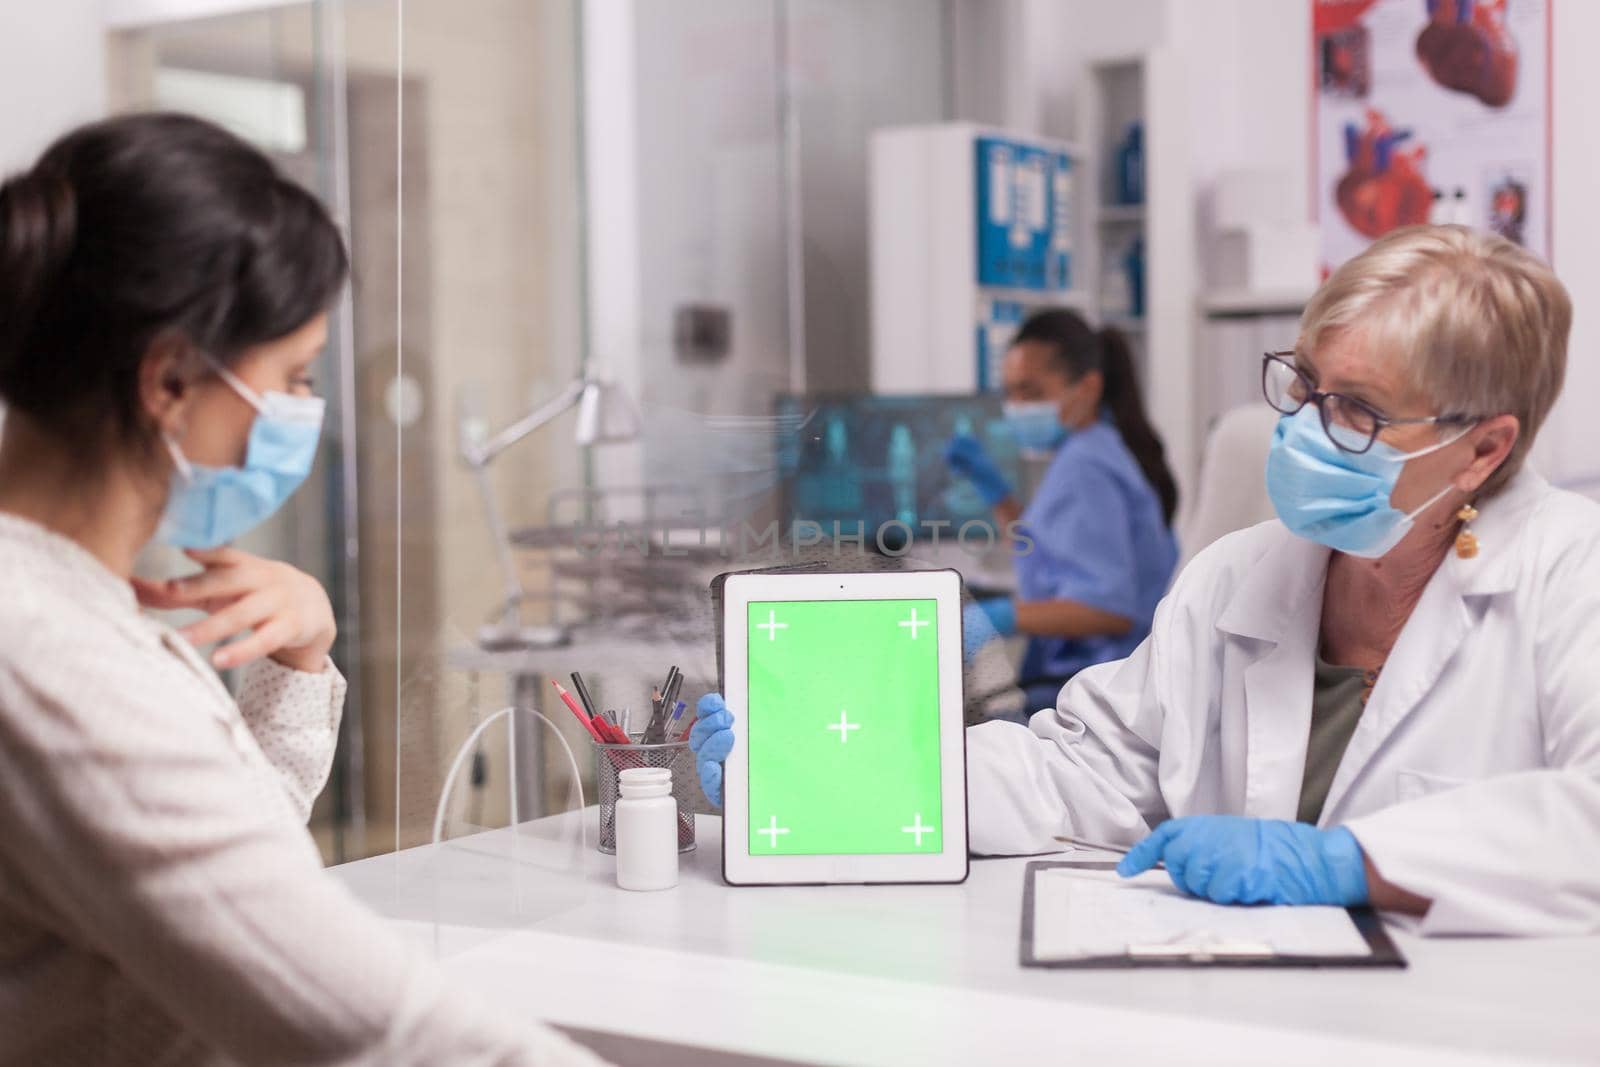 Doctor with face mask looking at tablet with green screen during consultation with sick patient. Nurse wearing blue uniform.